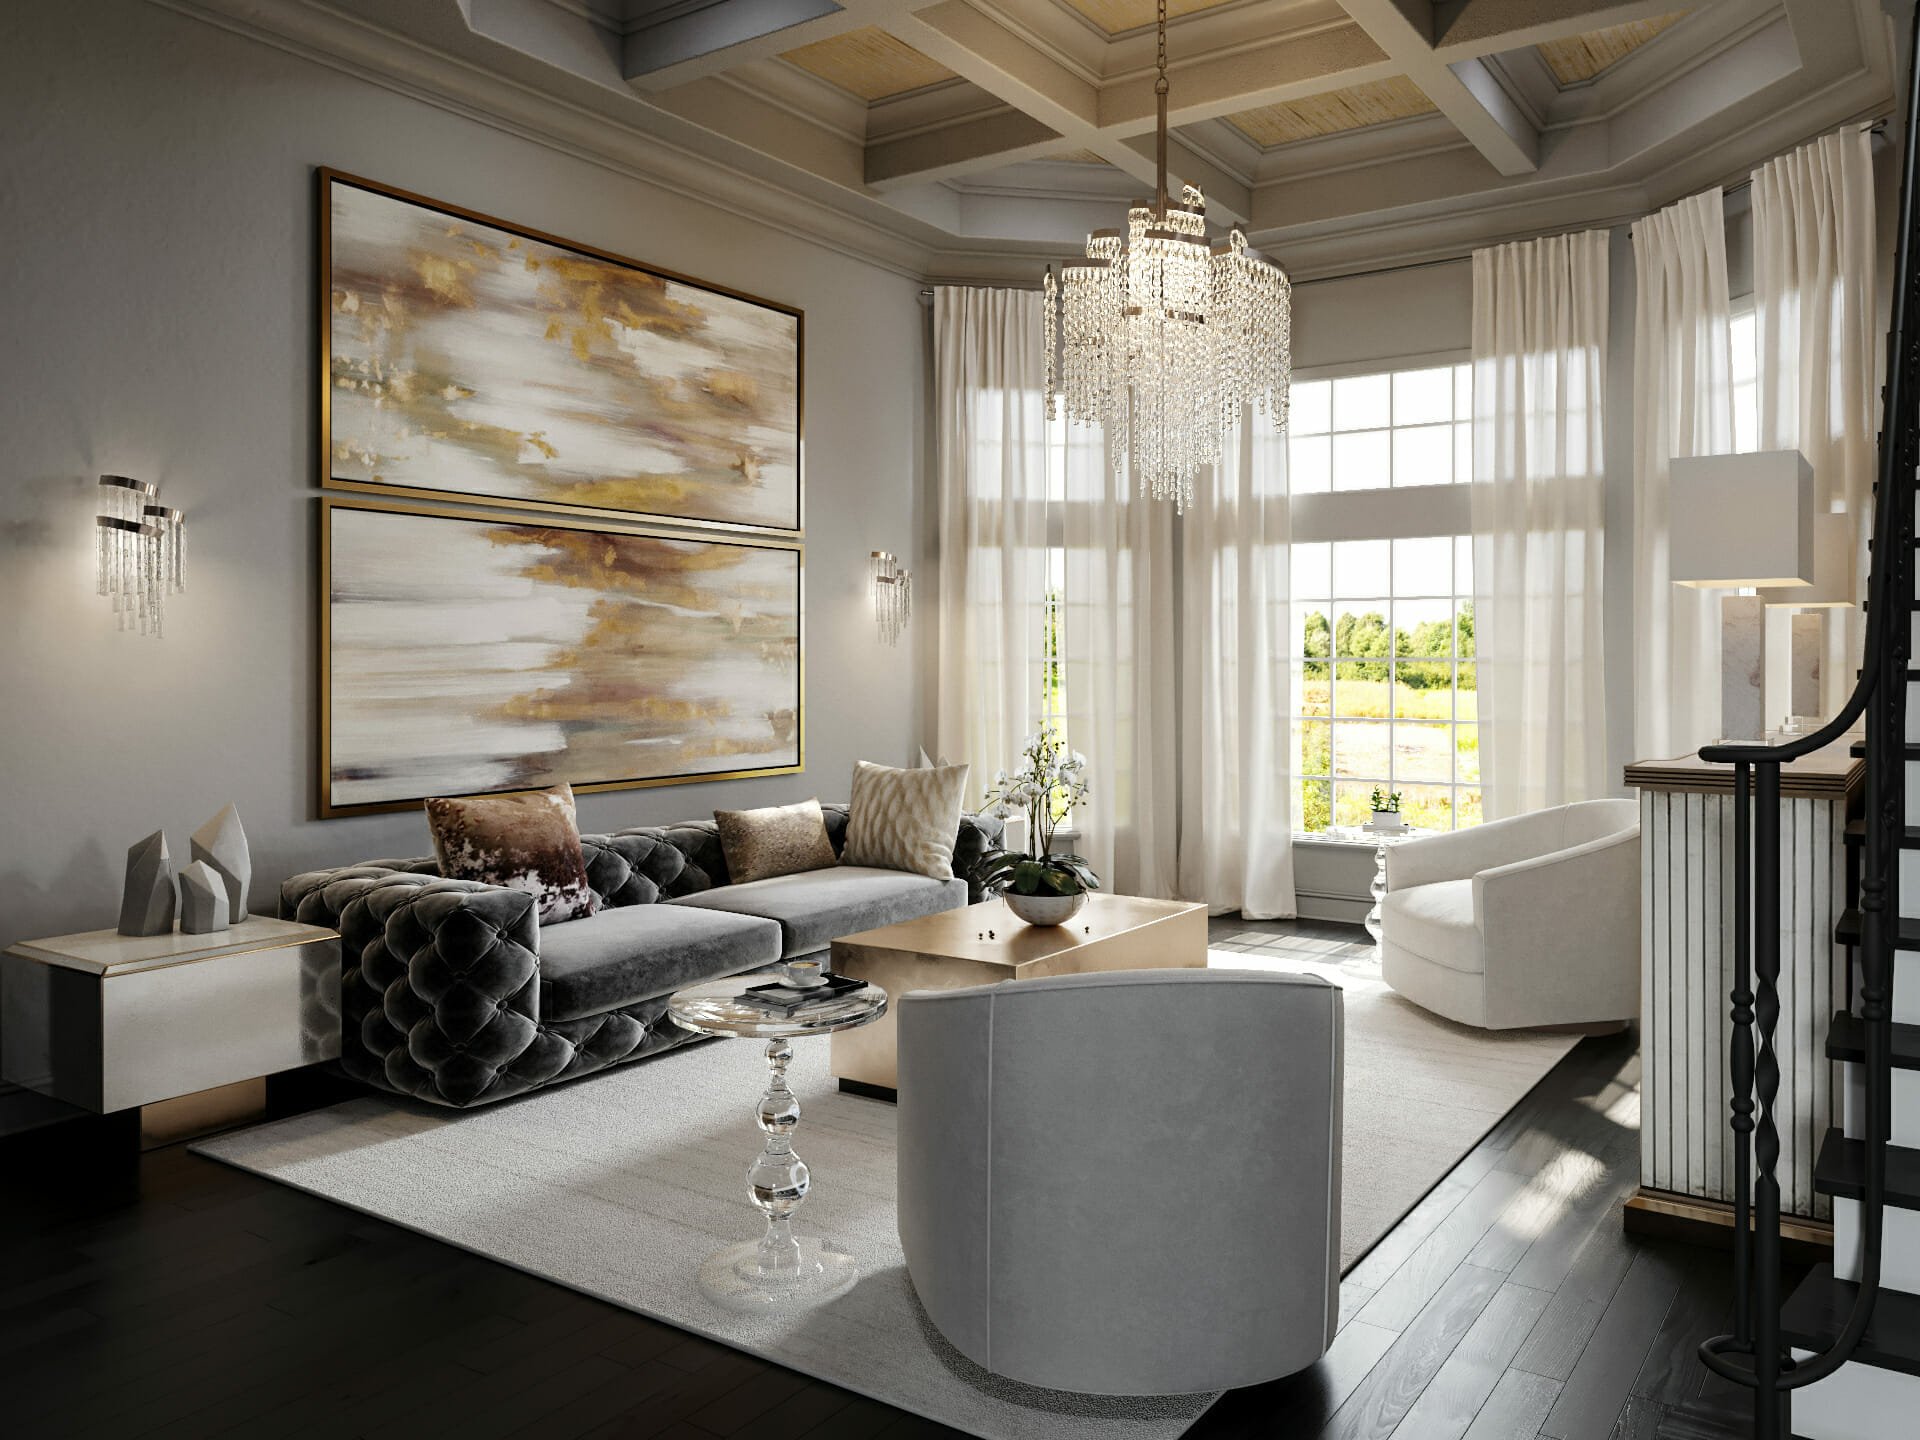 10 Tips For Creating A Spectacular Living Room Design